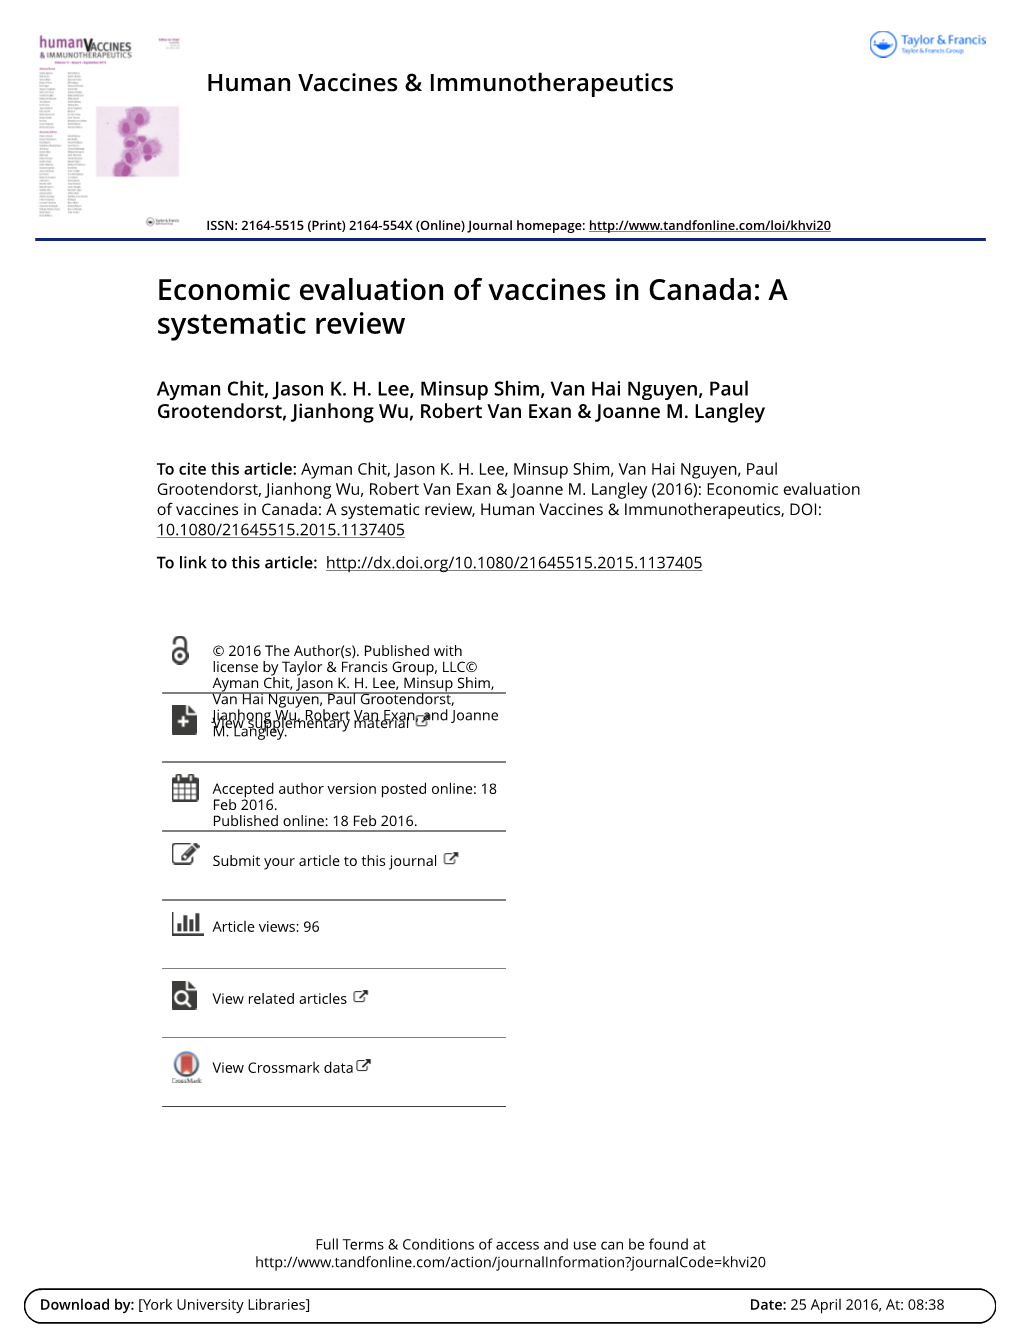 Economic Evaluation of Vaccines in Canada: a Systematic Review